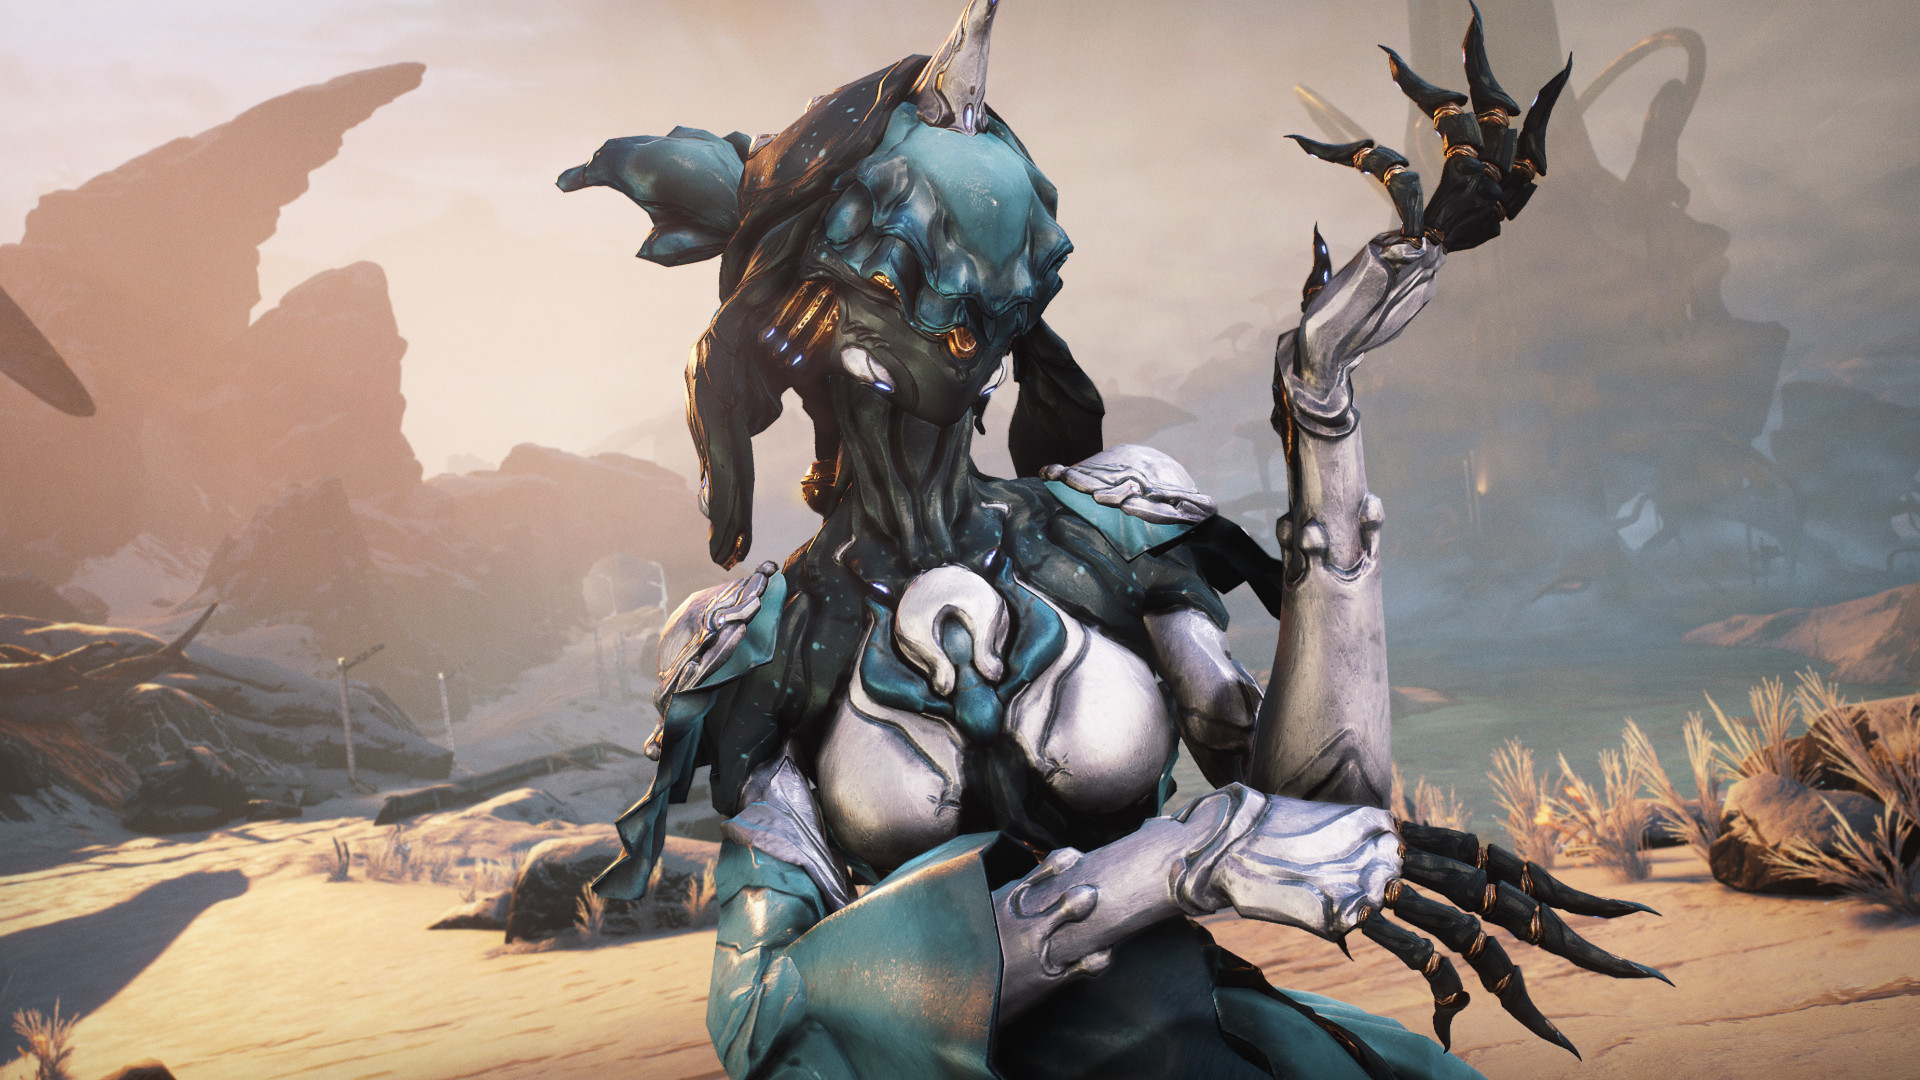 Warframe: Sisters of Parvos launches in six days